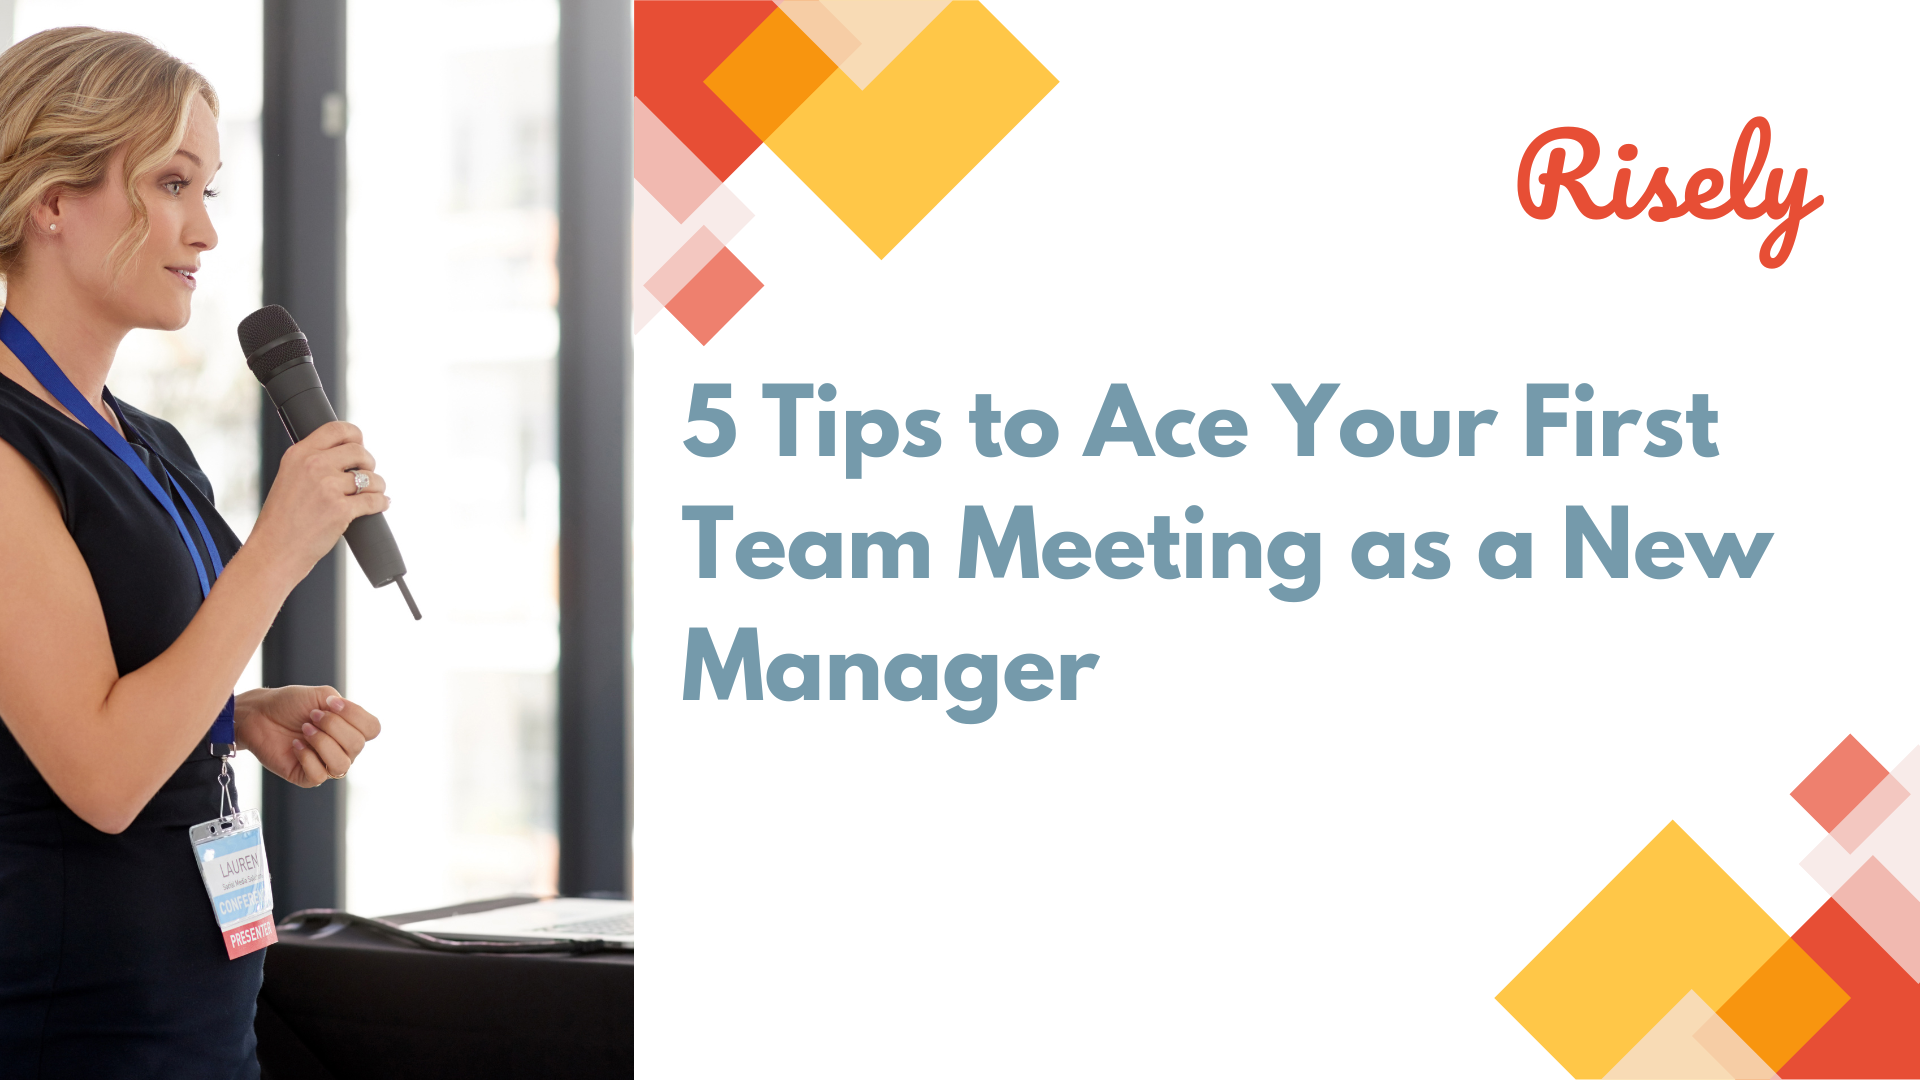 5 Tips to Ace Your First Team Meeting as a New Manager